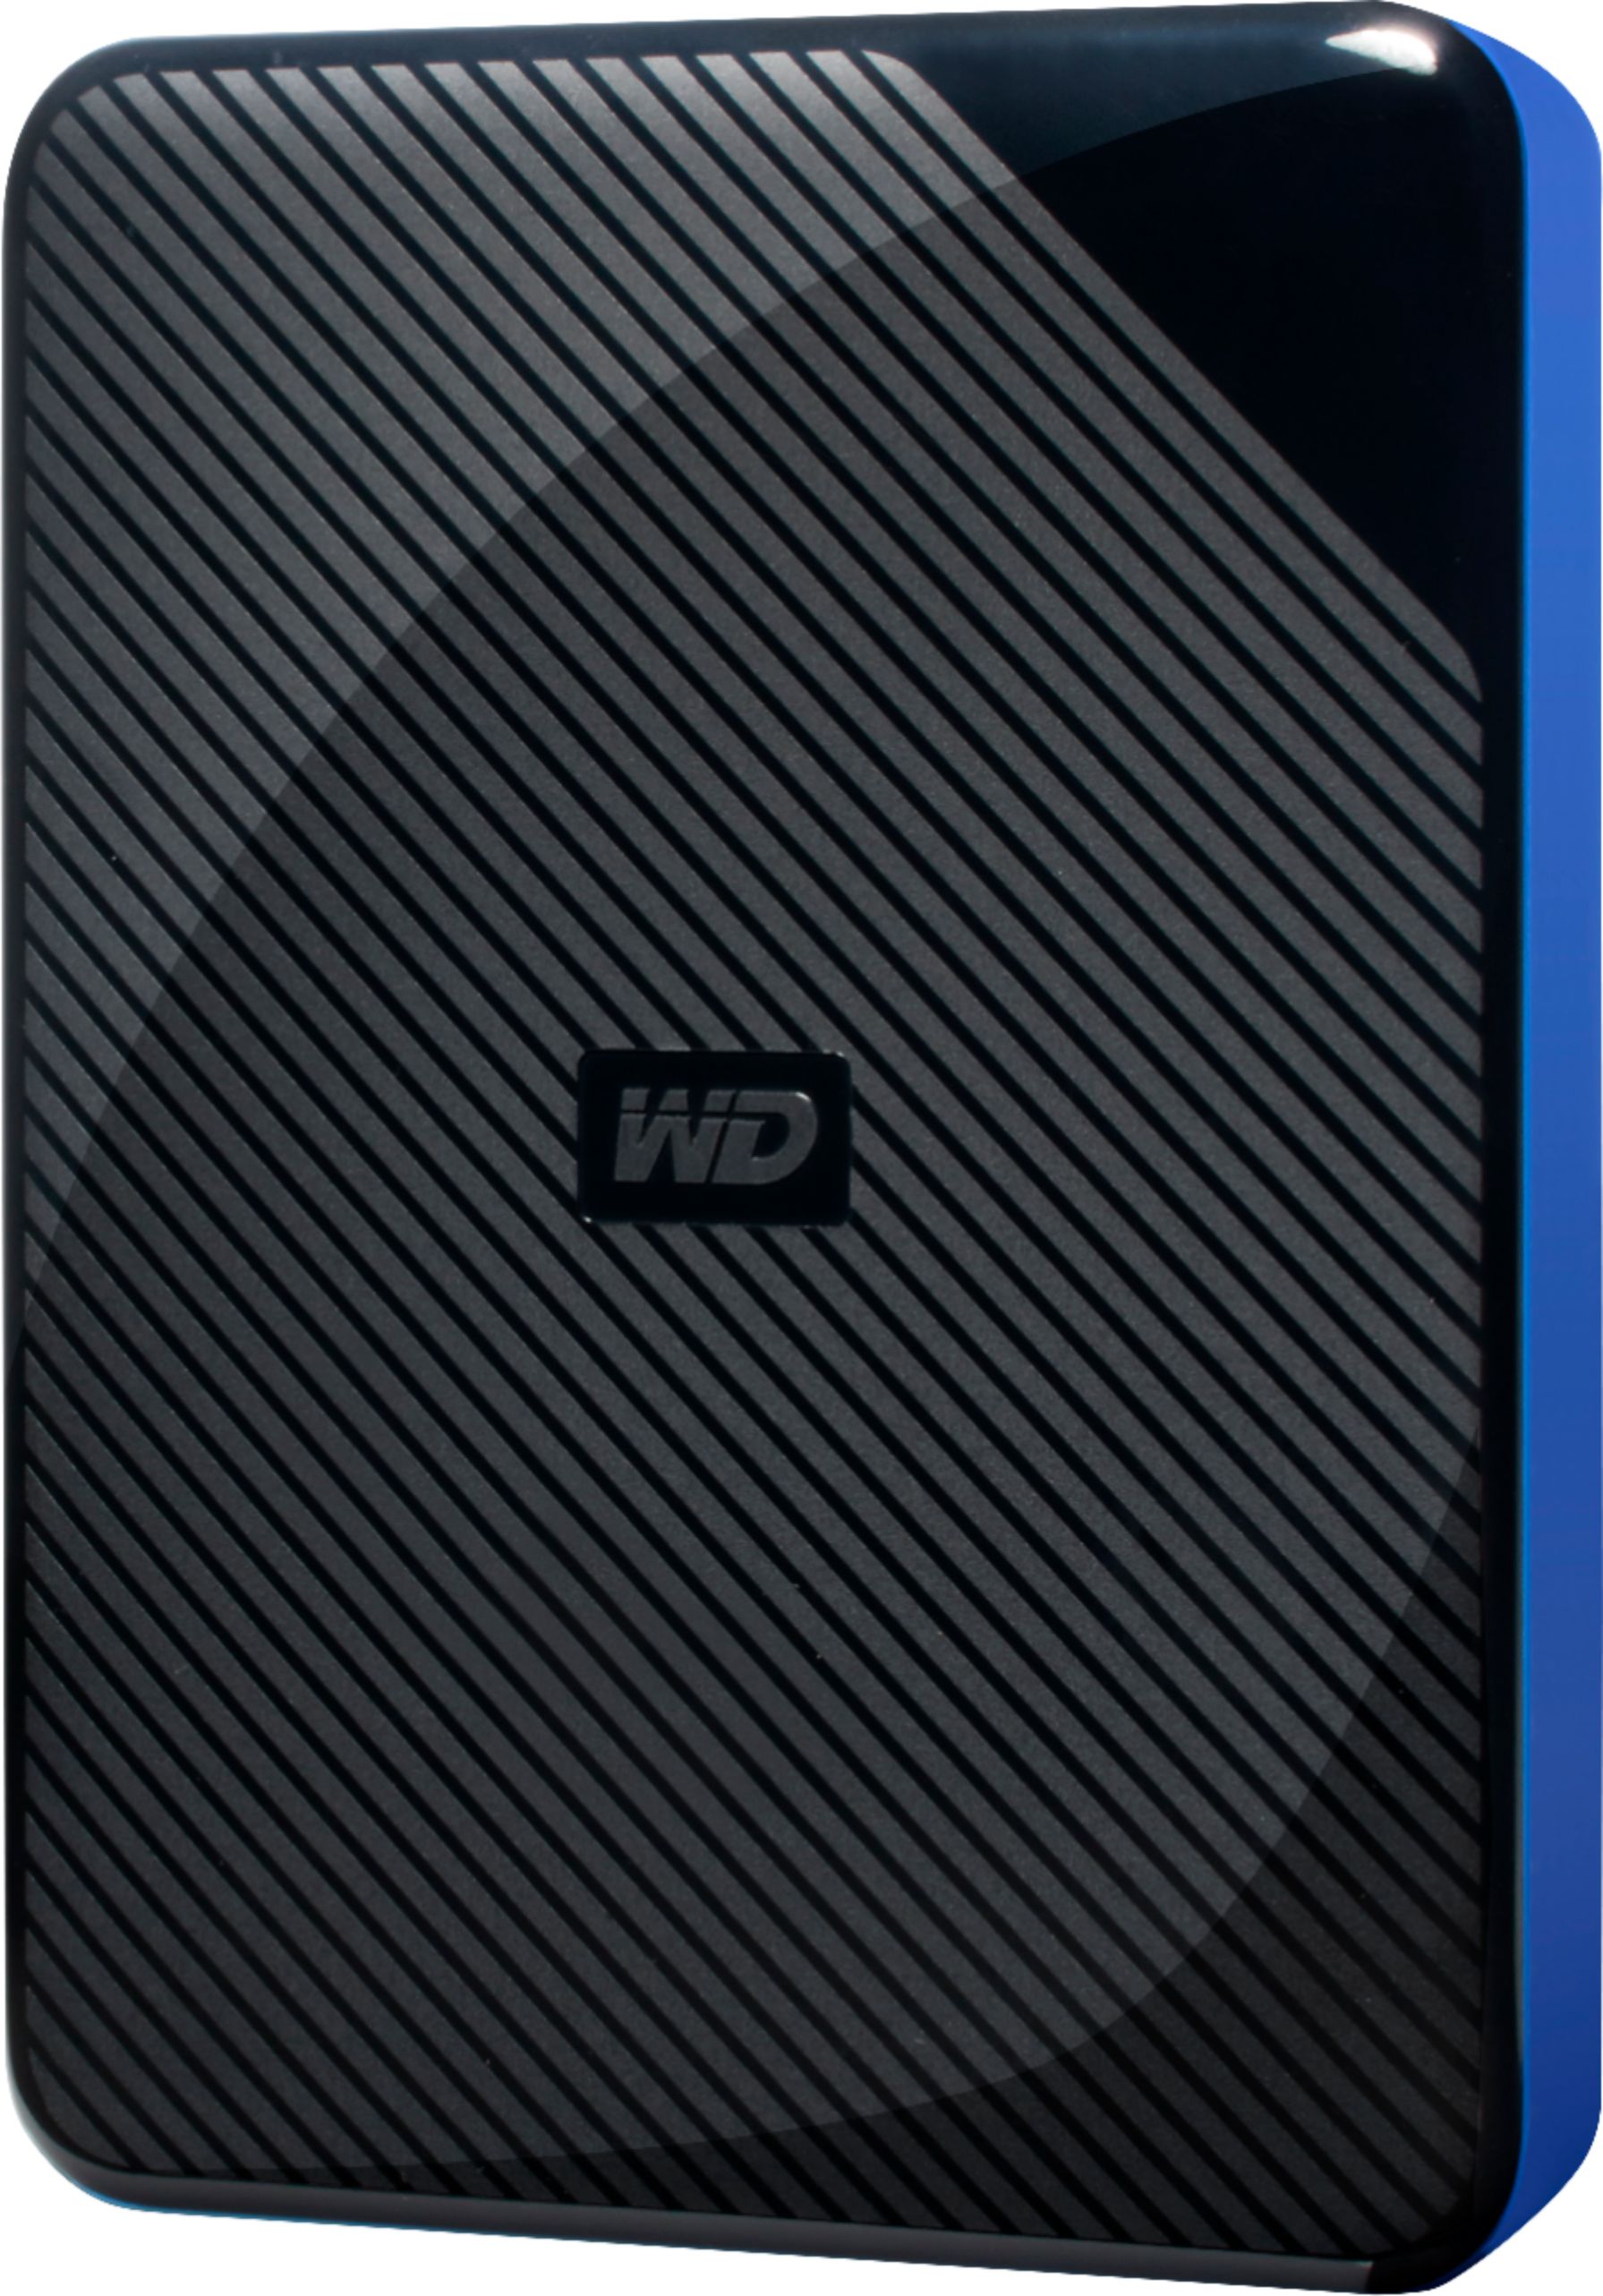 Left View: WD - My Passport Go 500GB External USB 3.0 Portable Solid State Drive - Black/Cobalt